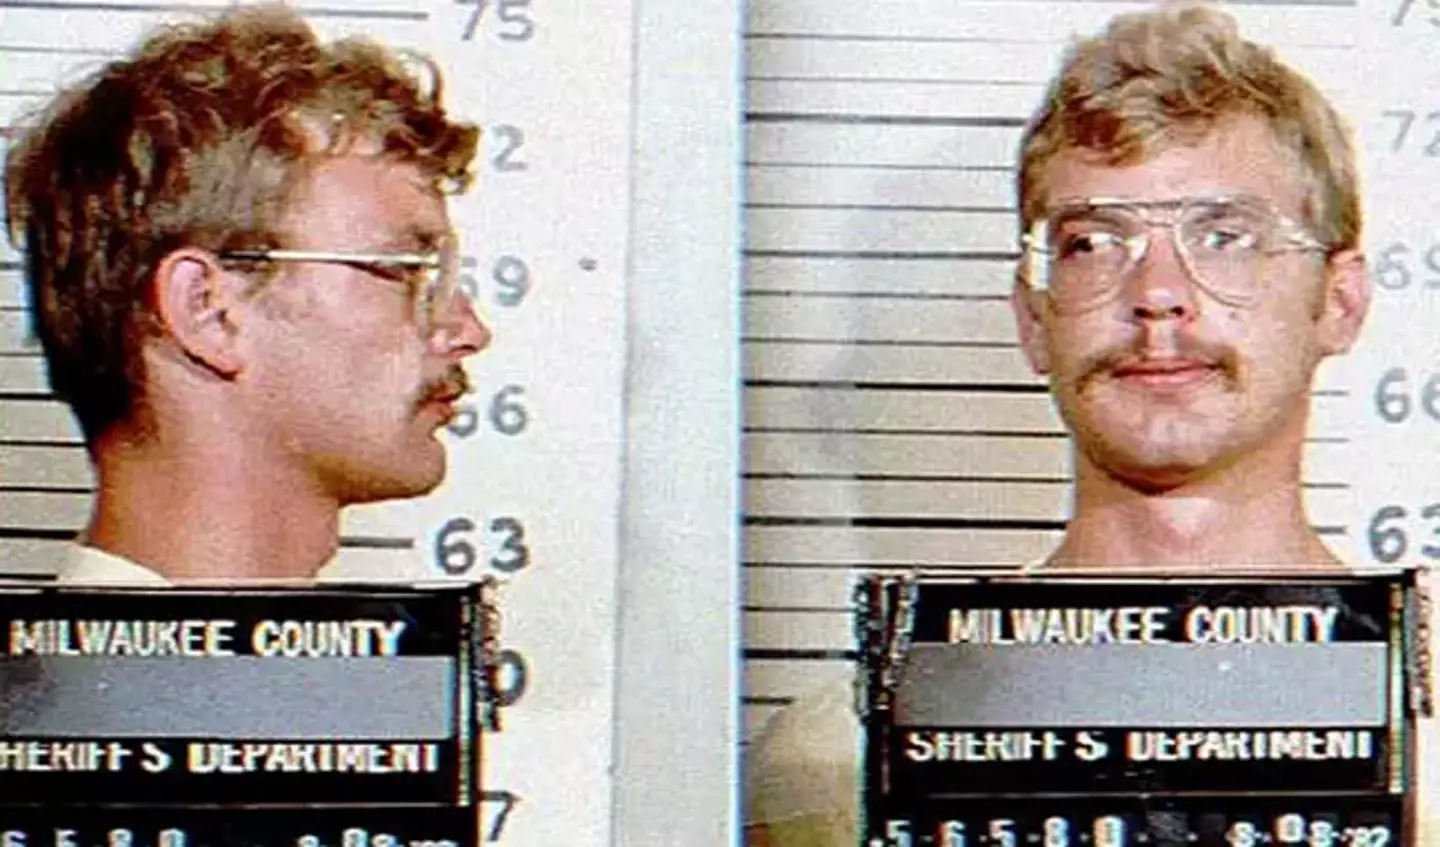 Jeffrey Dahmer killed 17 men and boys over a period of 13 years.